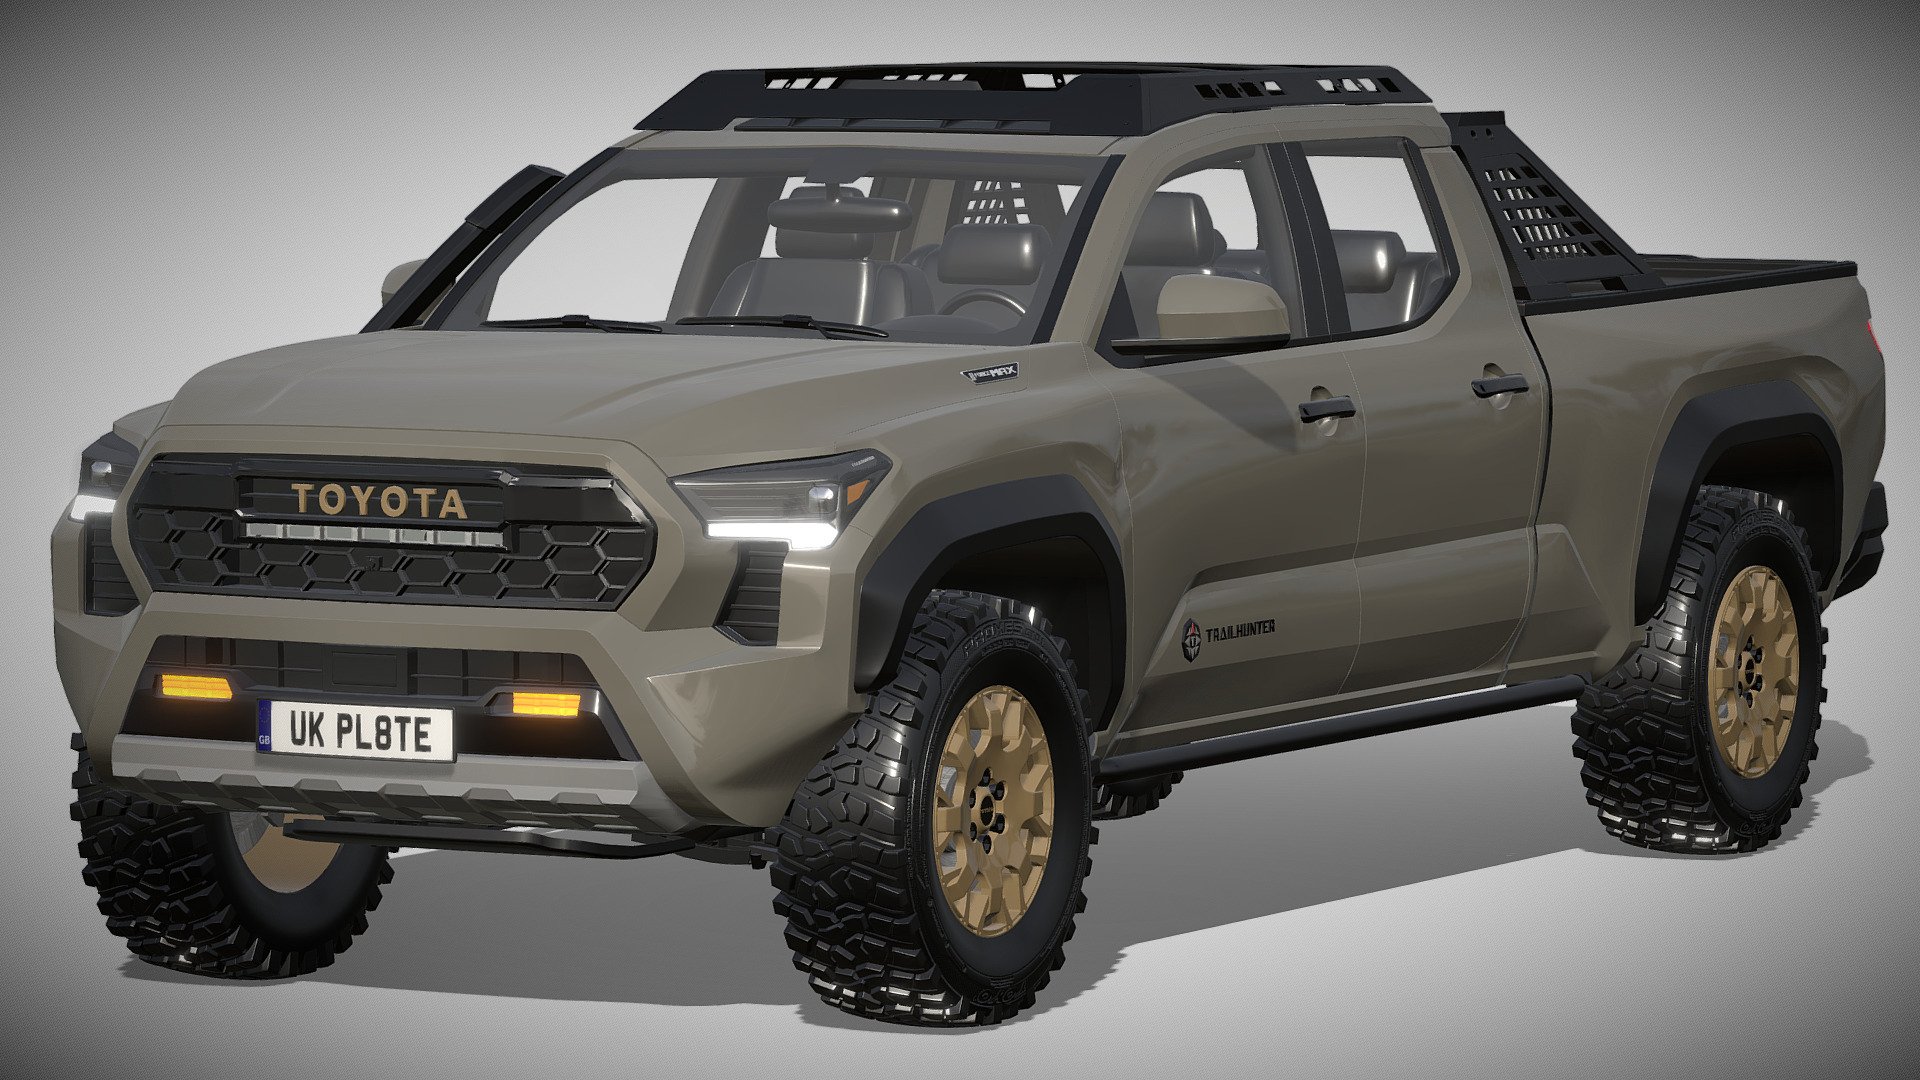 Toyota Tacoma Trailhunter 2024

https://www.toyota.com/upcoming-vehicles/tacoma/

Clean geometry Light weight model, yet completely detailed for HI-Res renders. Use for movies, Advertisements or games

Corona render and materials

All textures include in *.rar files

Lighting setup is not included in the file! - Toyota Tacoma Trailhunter 2024 - Buy Royalty Free 3D model by zifir3d 3d model